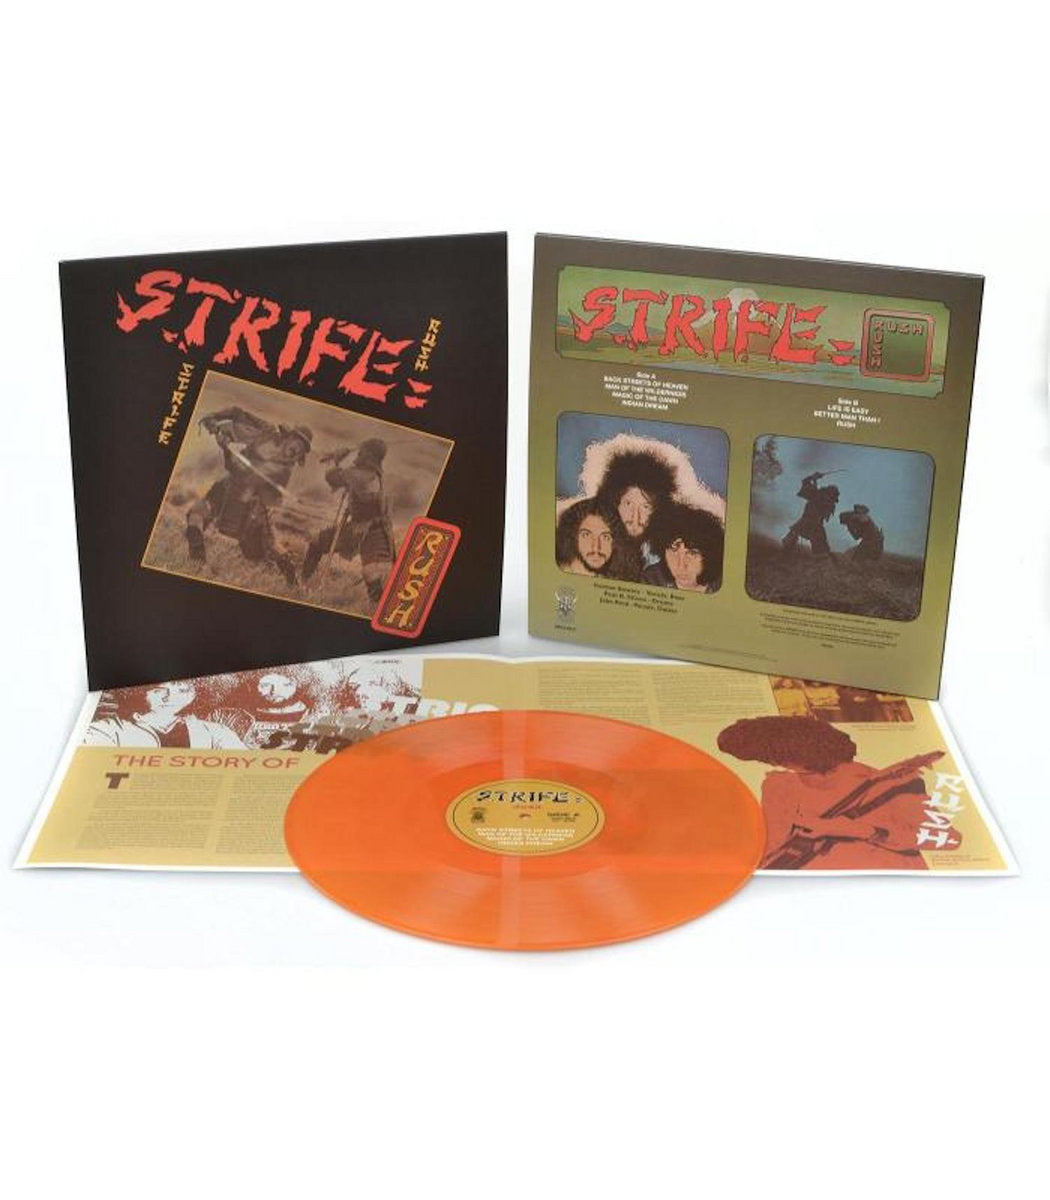 STRIFE - Rush (12" LP on Yellow with Orange/Red Marbled Vinyl)